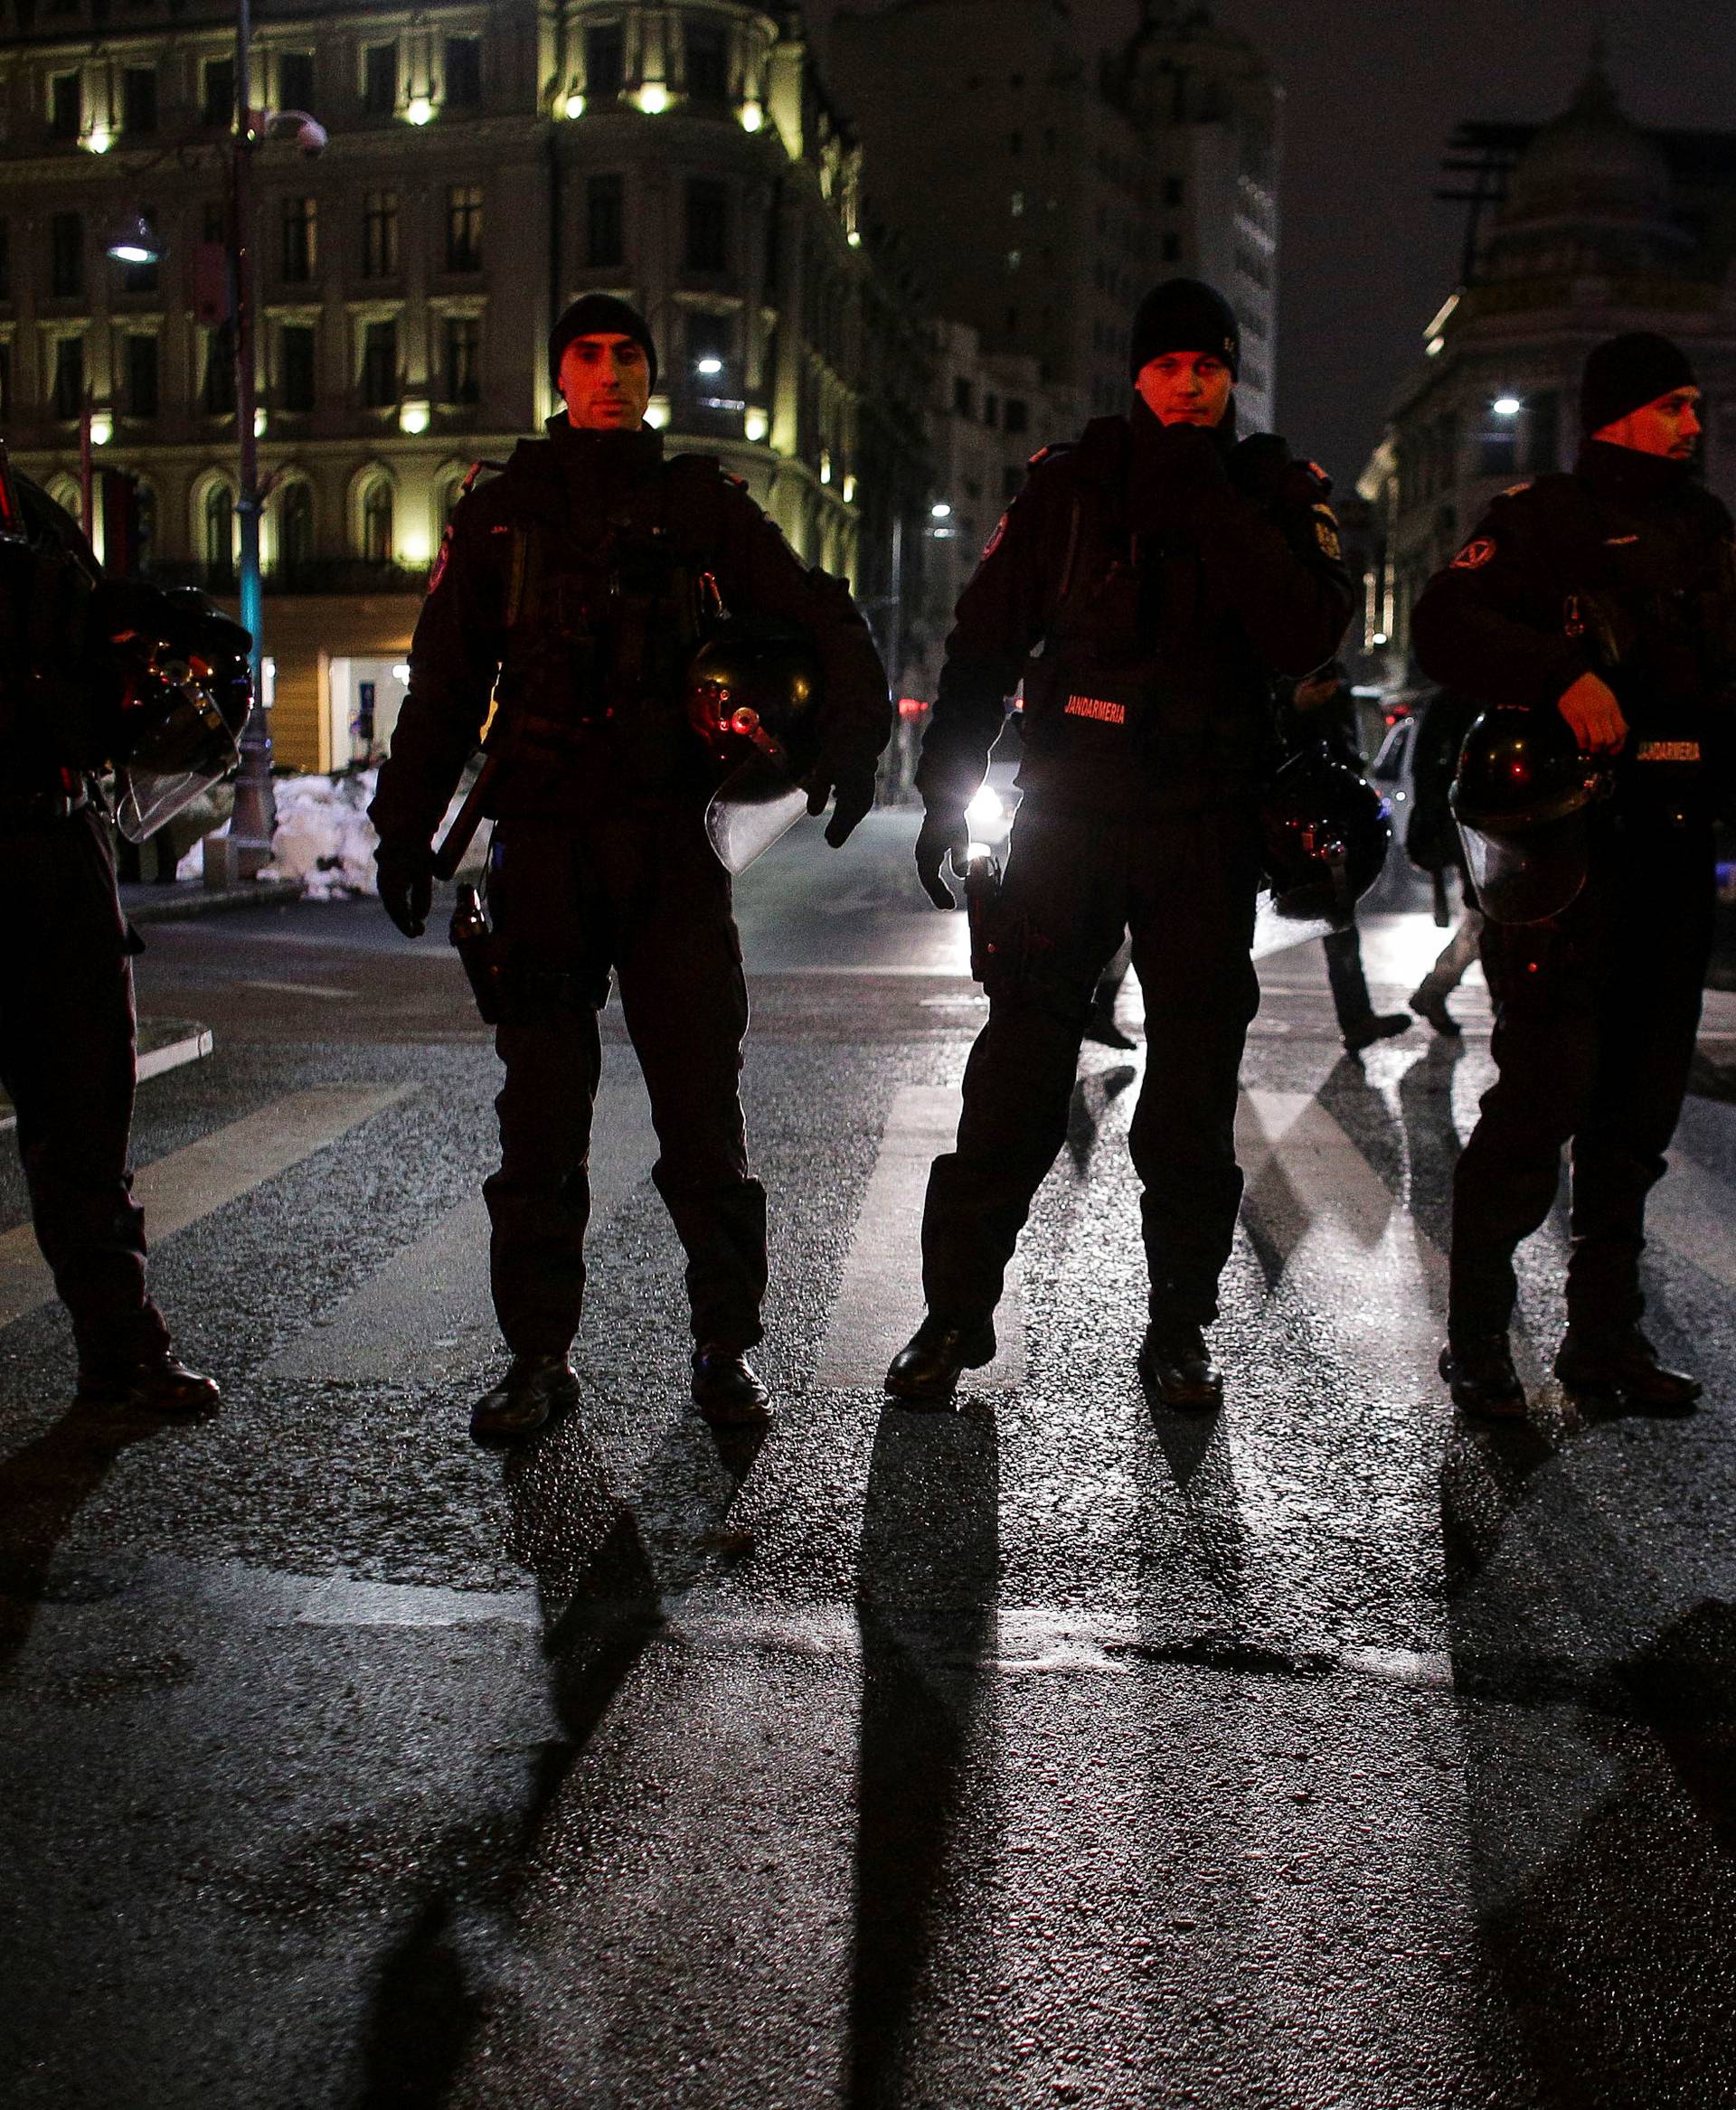 Romanian police stand guard during a demonstration  against government plans to reform some criminal laws through emergency decree, in Bucharest